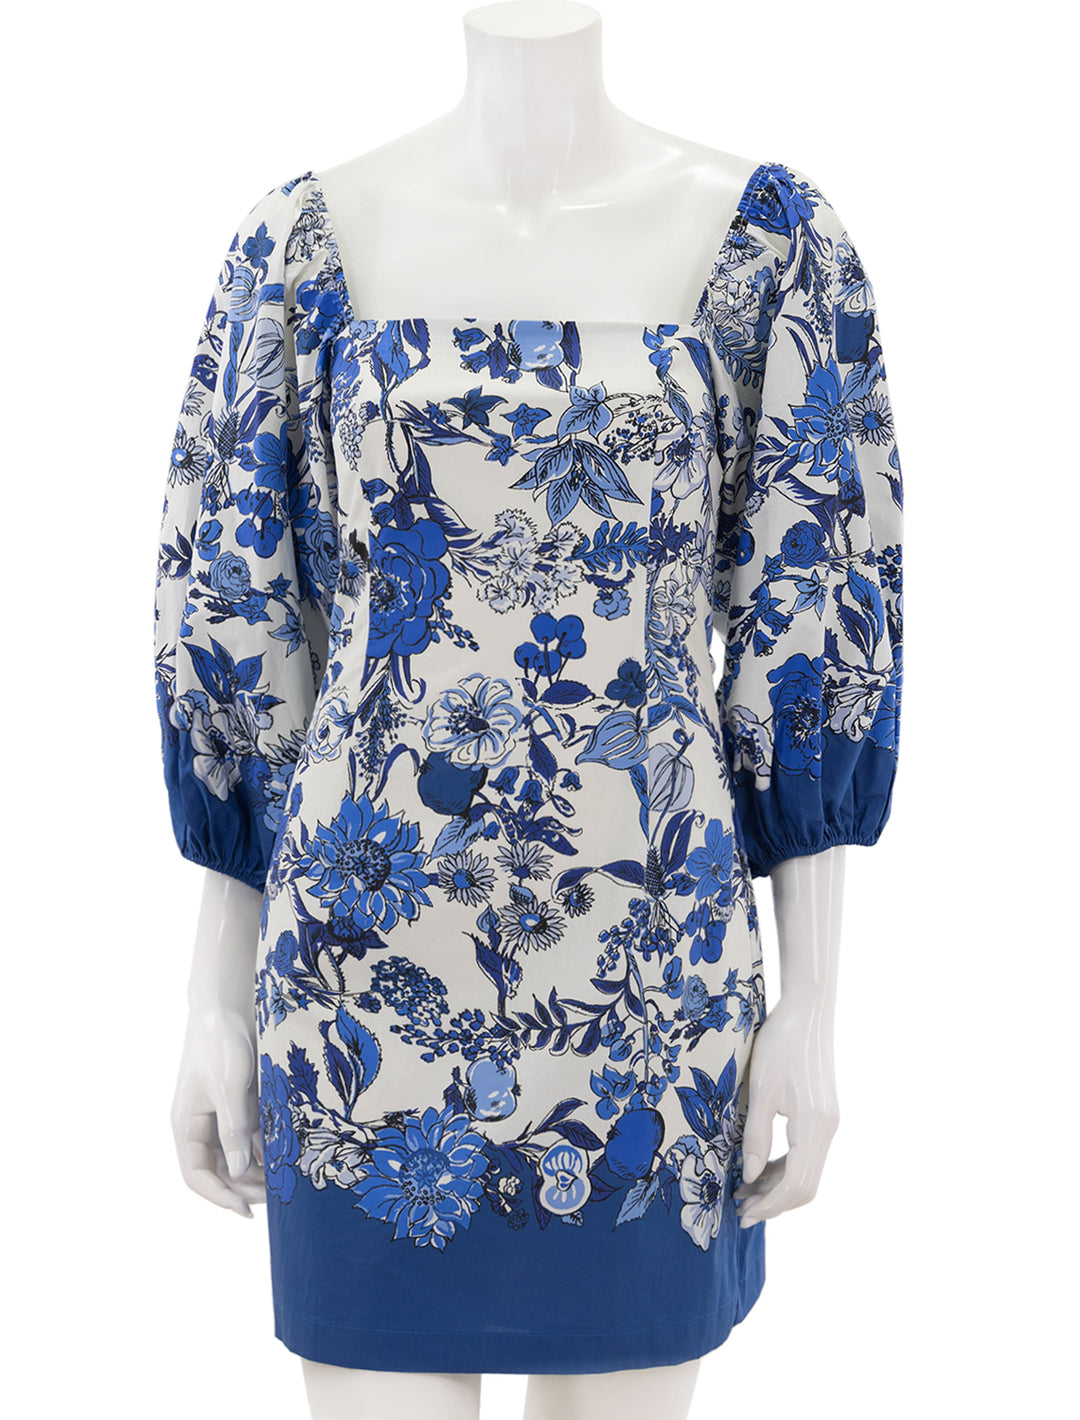 Front view of Cara Cara's montauk dress in flower grid blue.